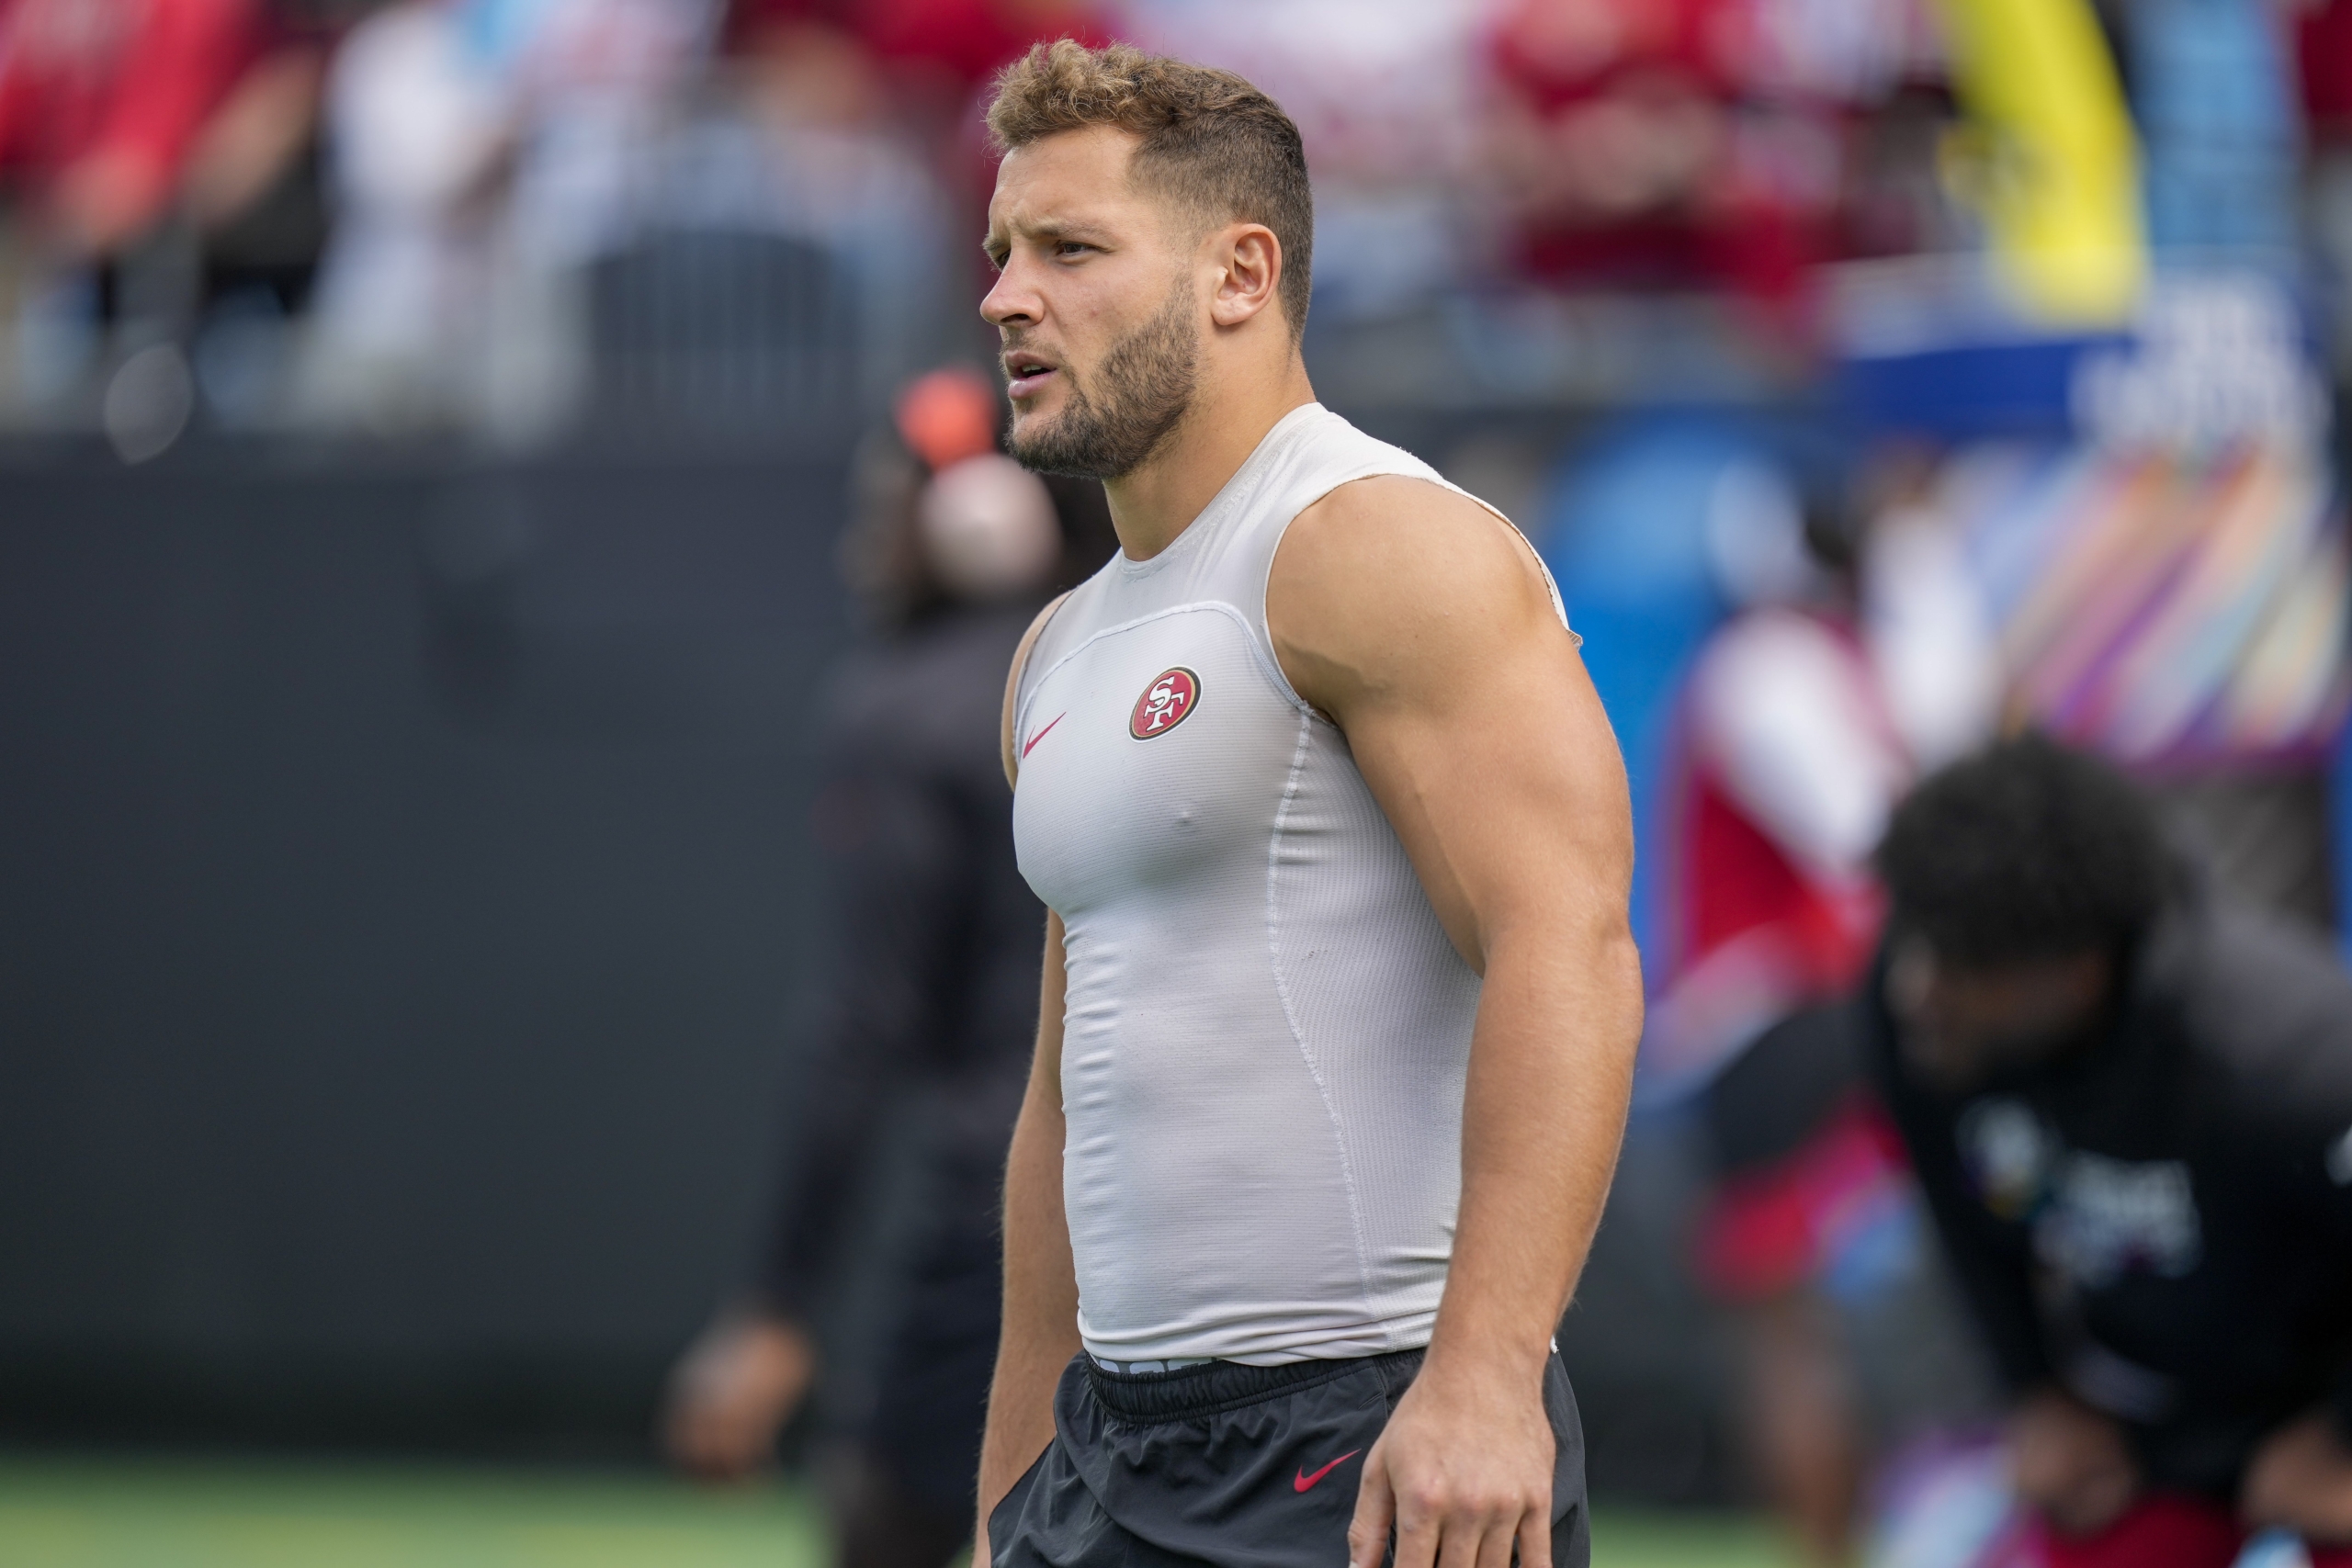 San Francisco 49ers star Nick Bosa ruled out with groin injury